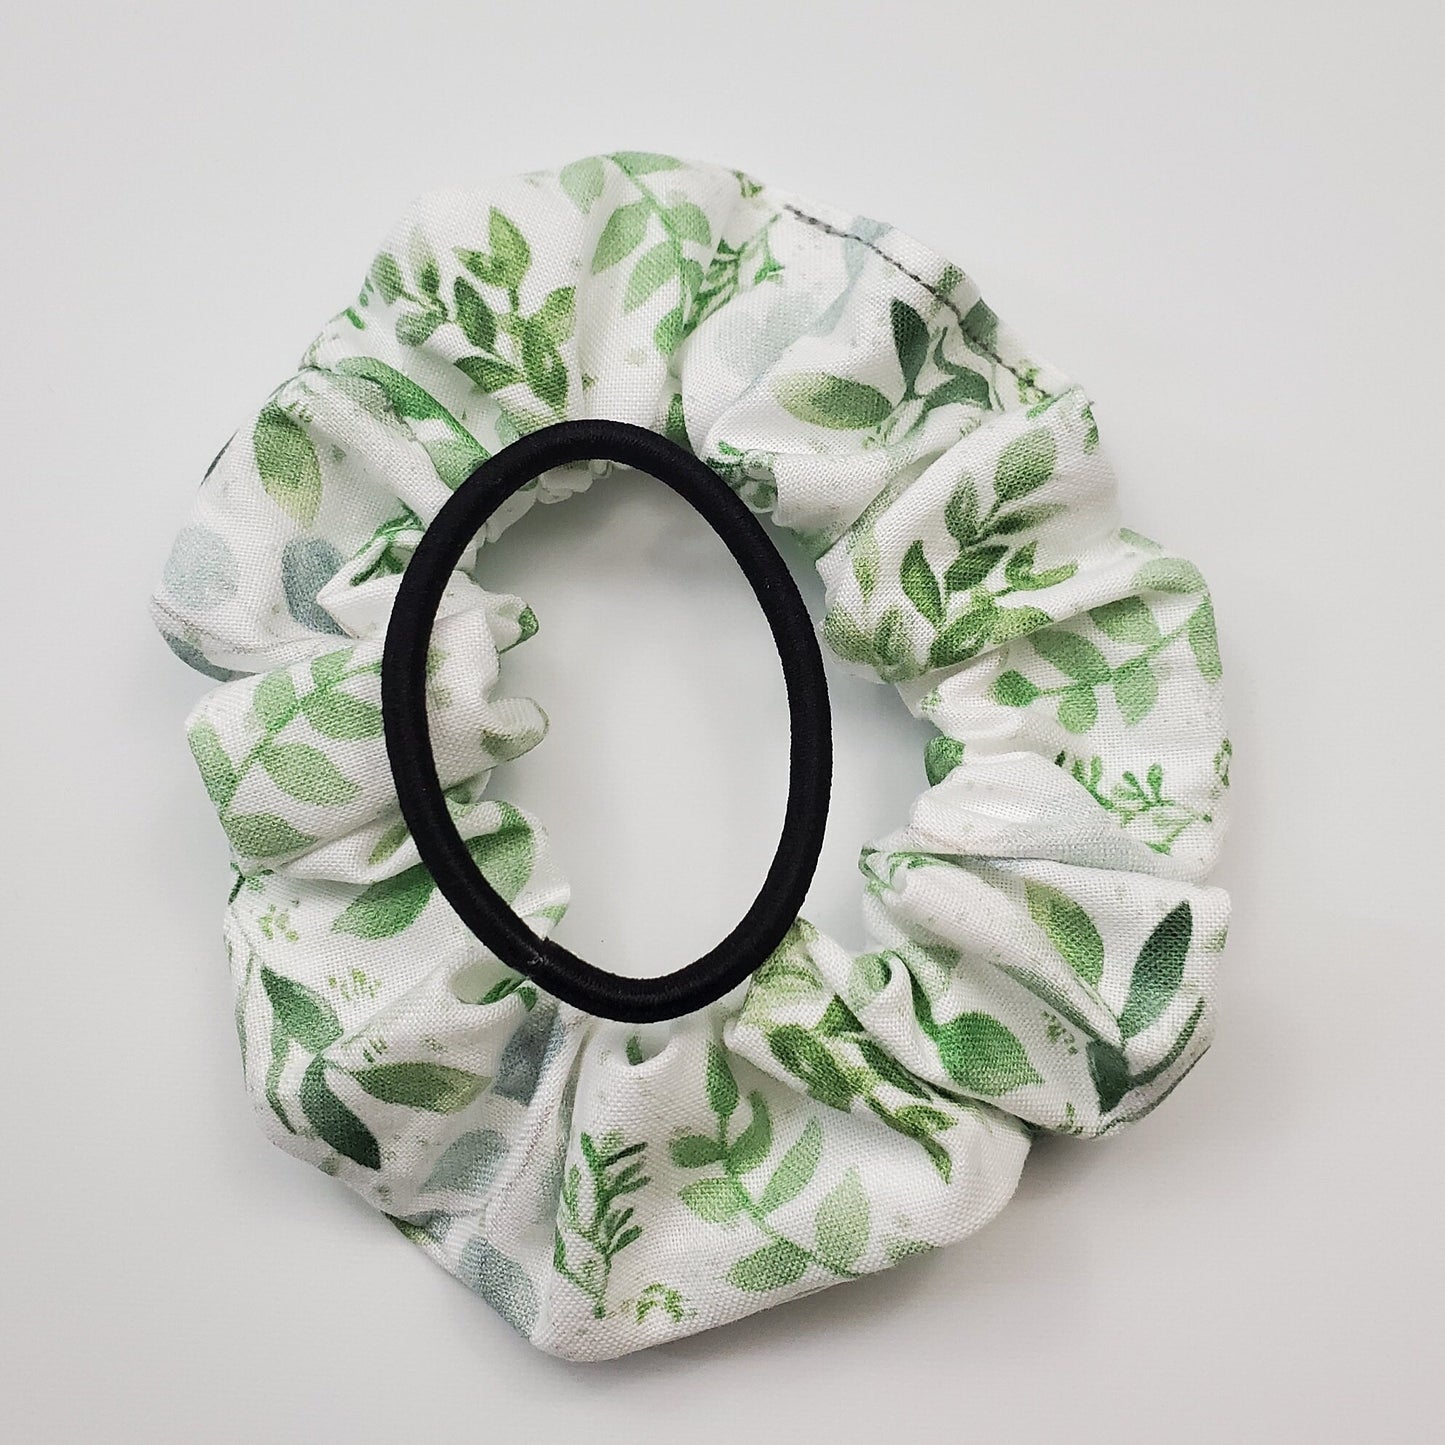 White with eucalyptus leaves Scrunchie with a regular black hair tie on top to show the size.